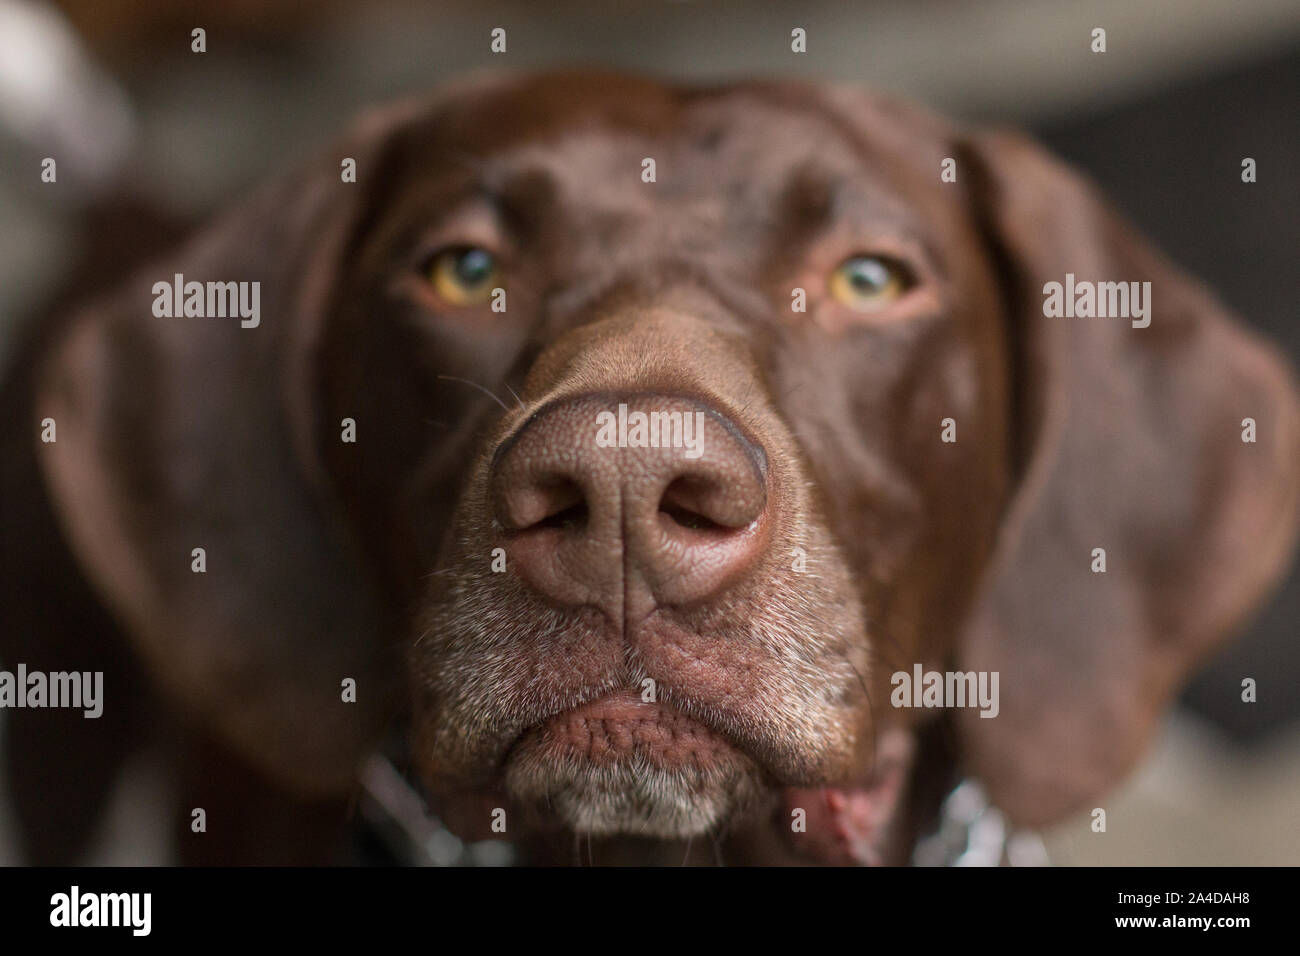 Portrait of a German short-haired pointer dog Stock Photo